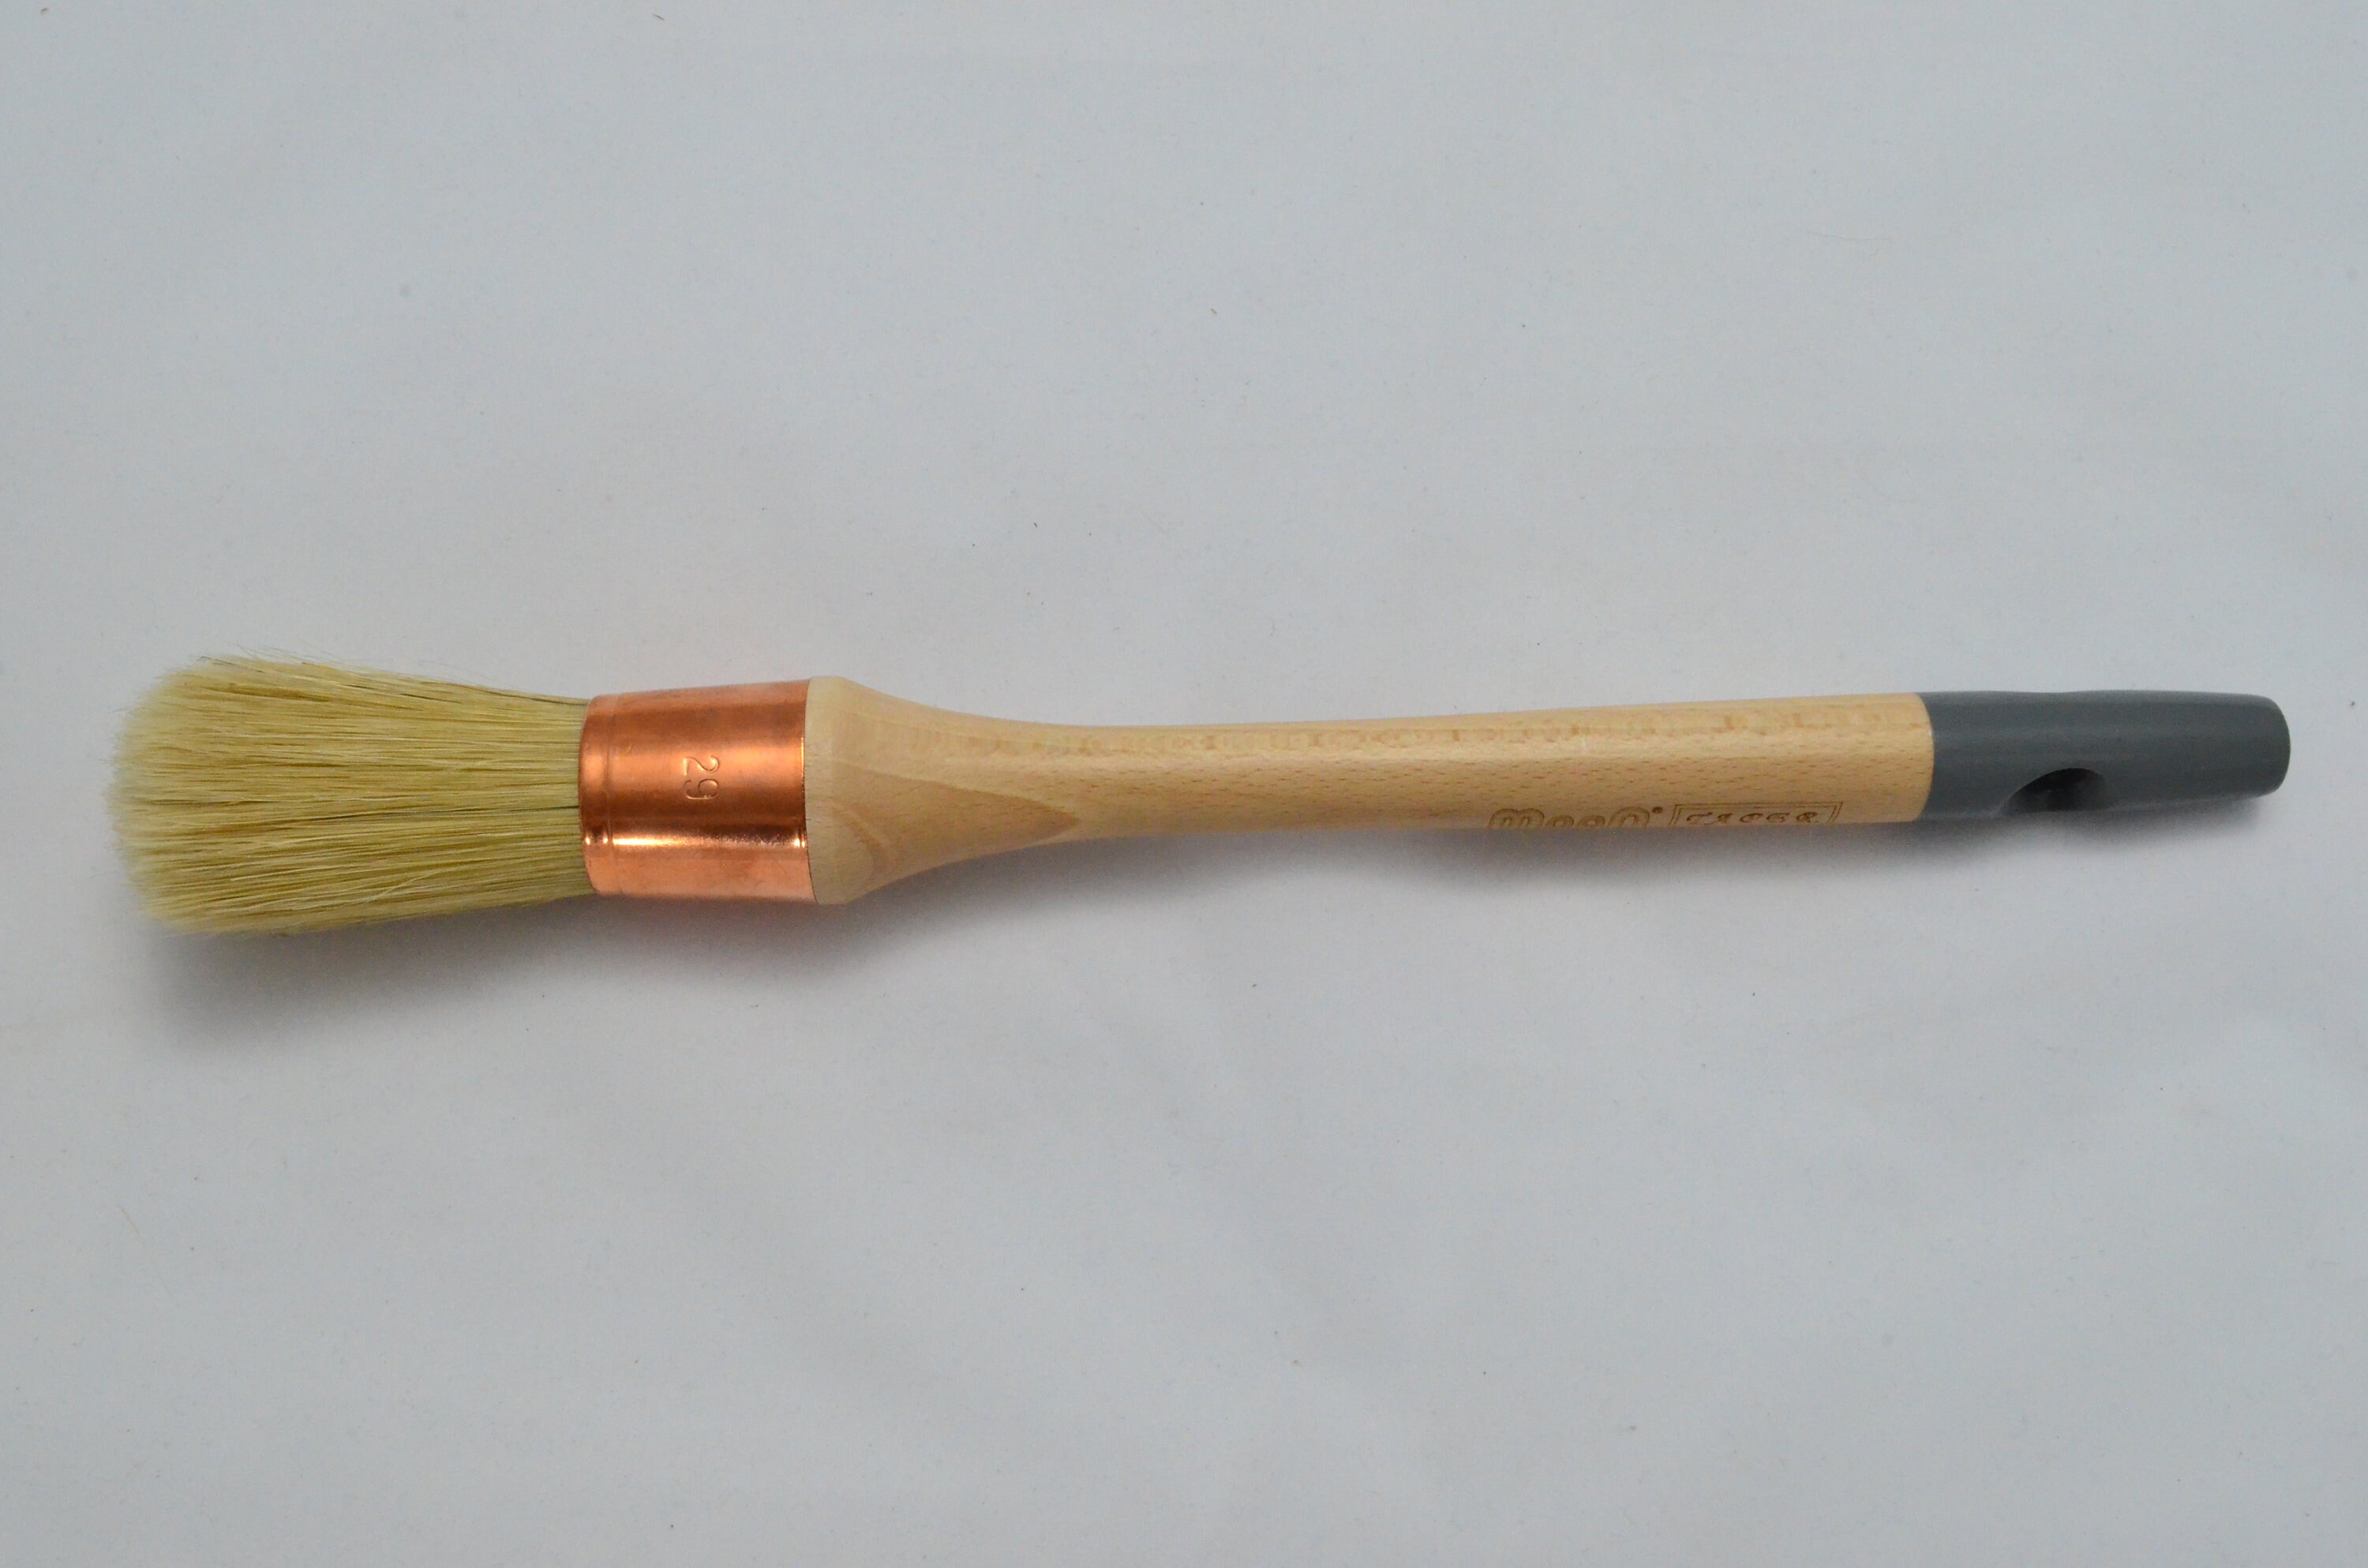 Wooden Handle Pure Bristle Tapered Round Chalk Paint Brushes - China Round Chalk  Paint Brushes, Round Wax Paint Brushes